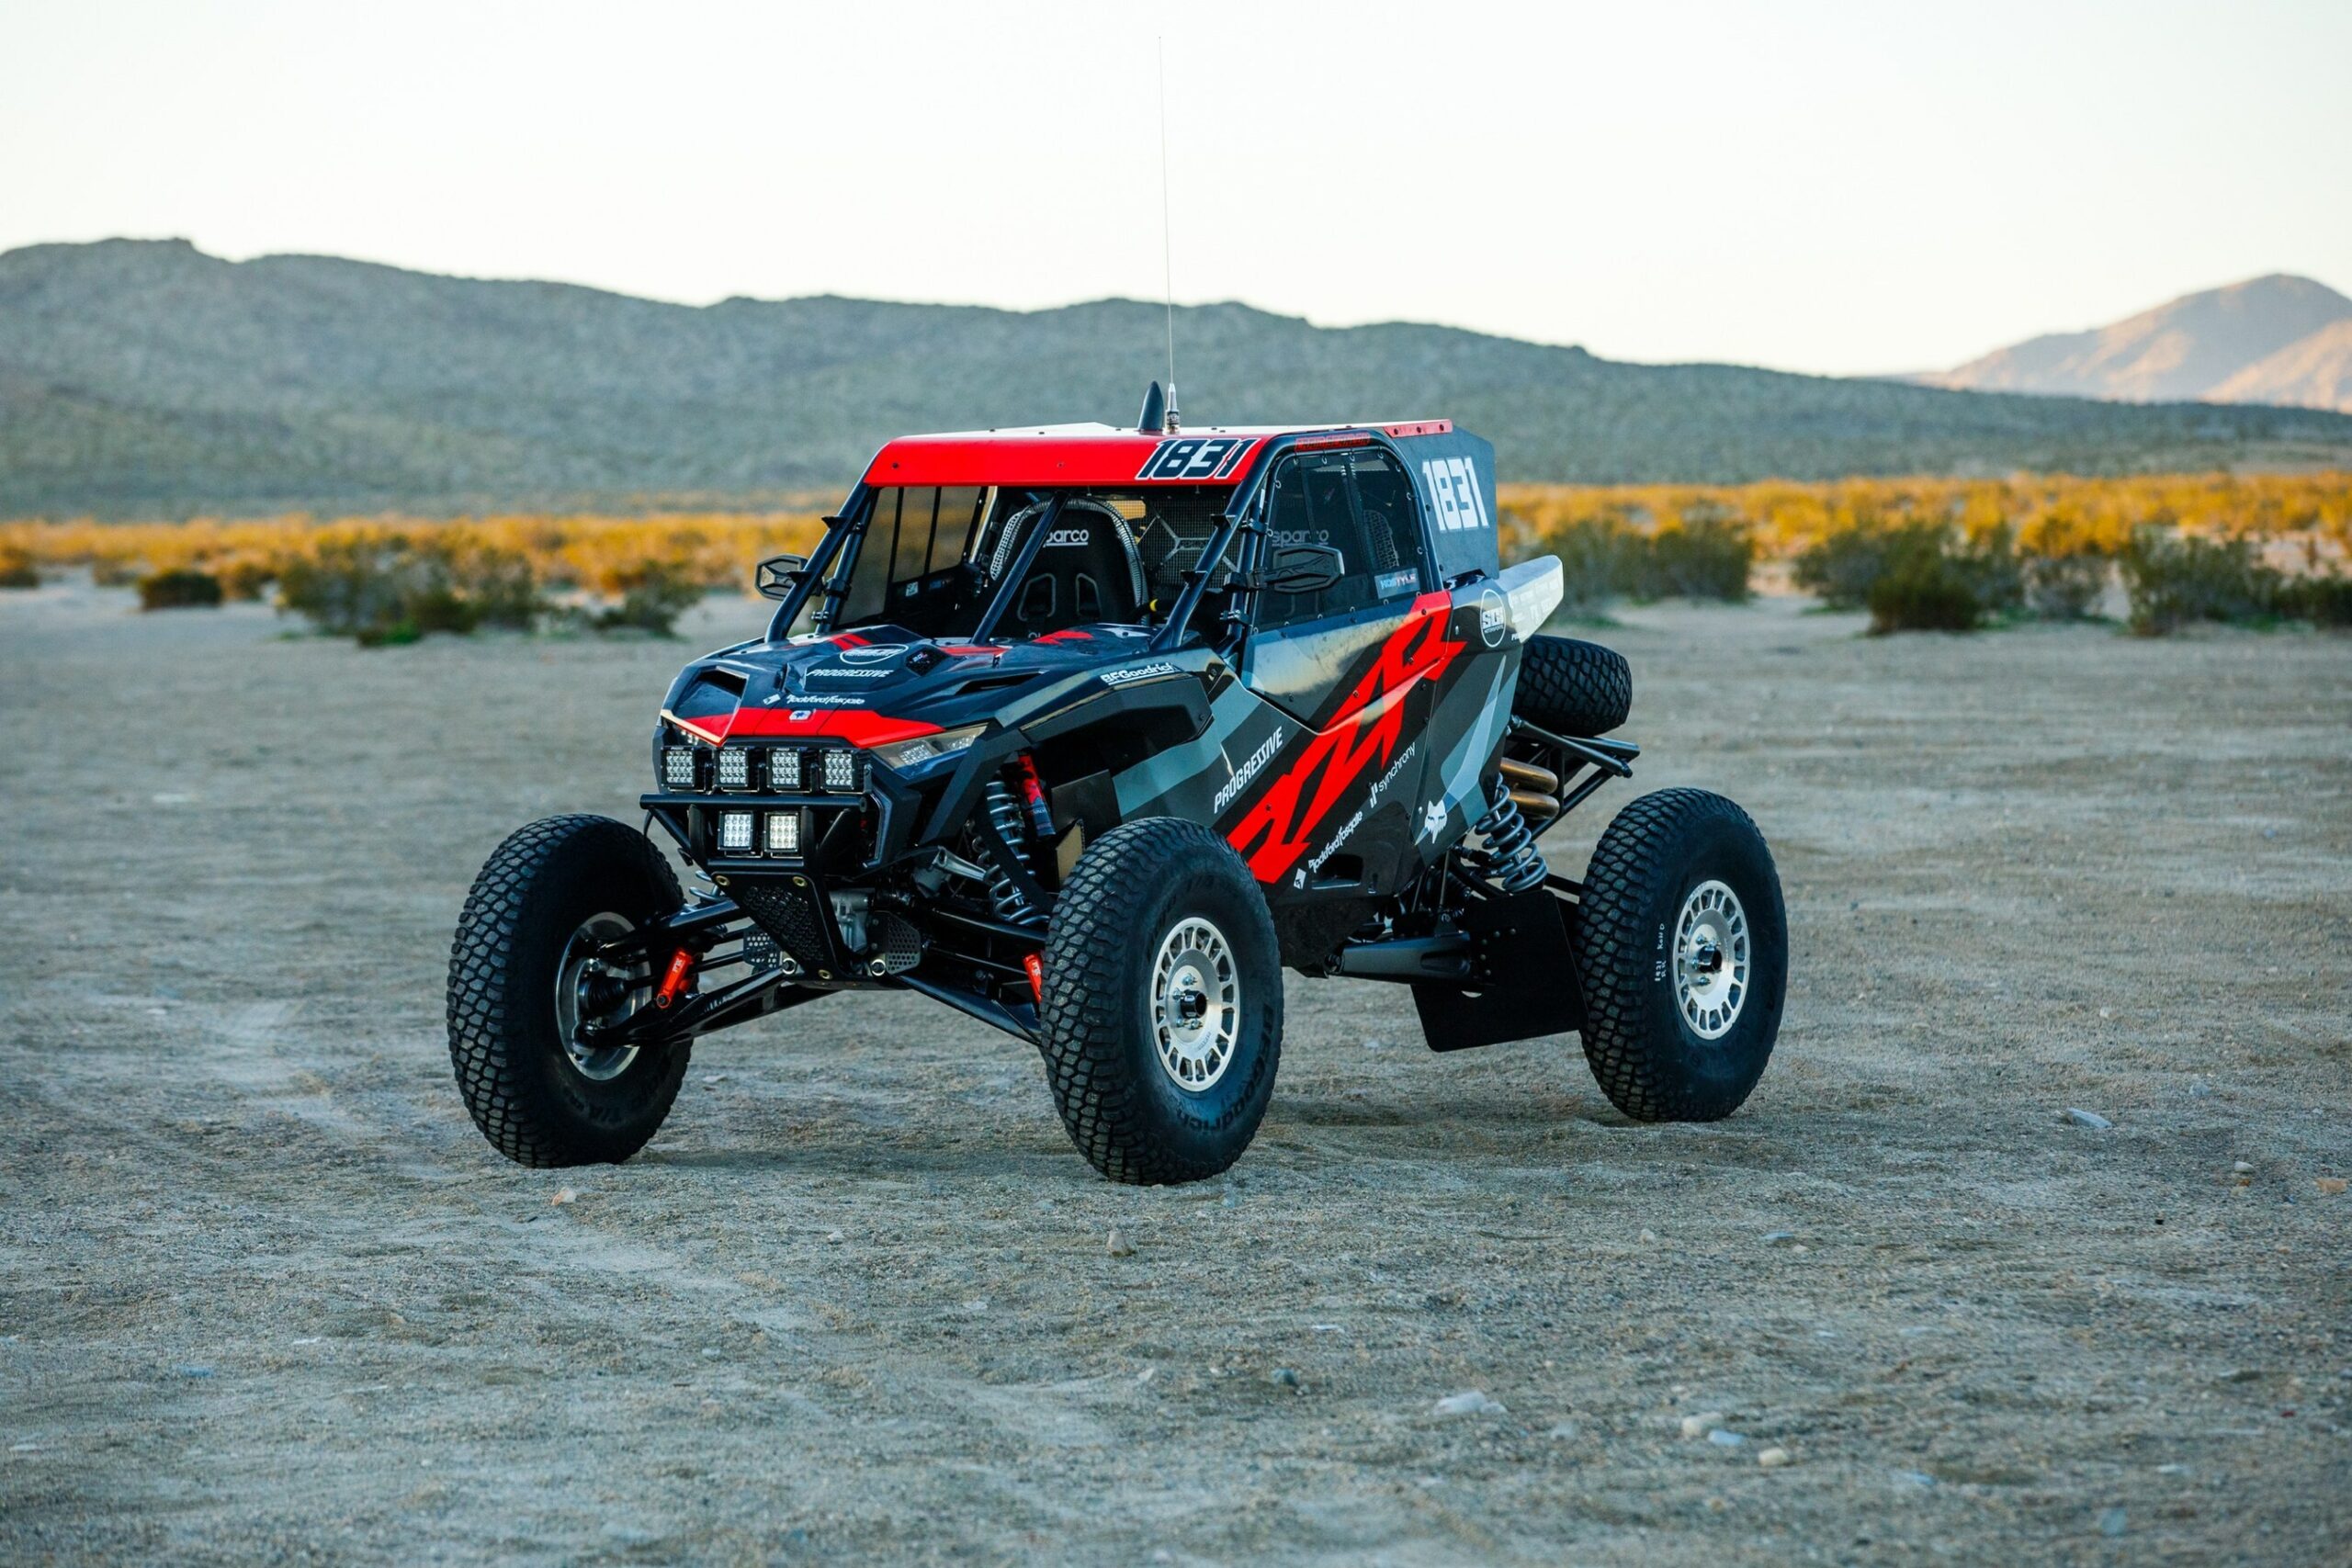 POLARIS TAKES OFF-ROAD RACING’S MOST DOMINANT UTV TO THE NEXT LEVEL WITH GEN 2 RZR PRO R FACTORY